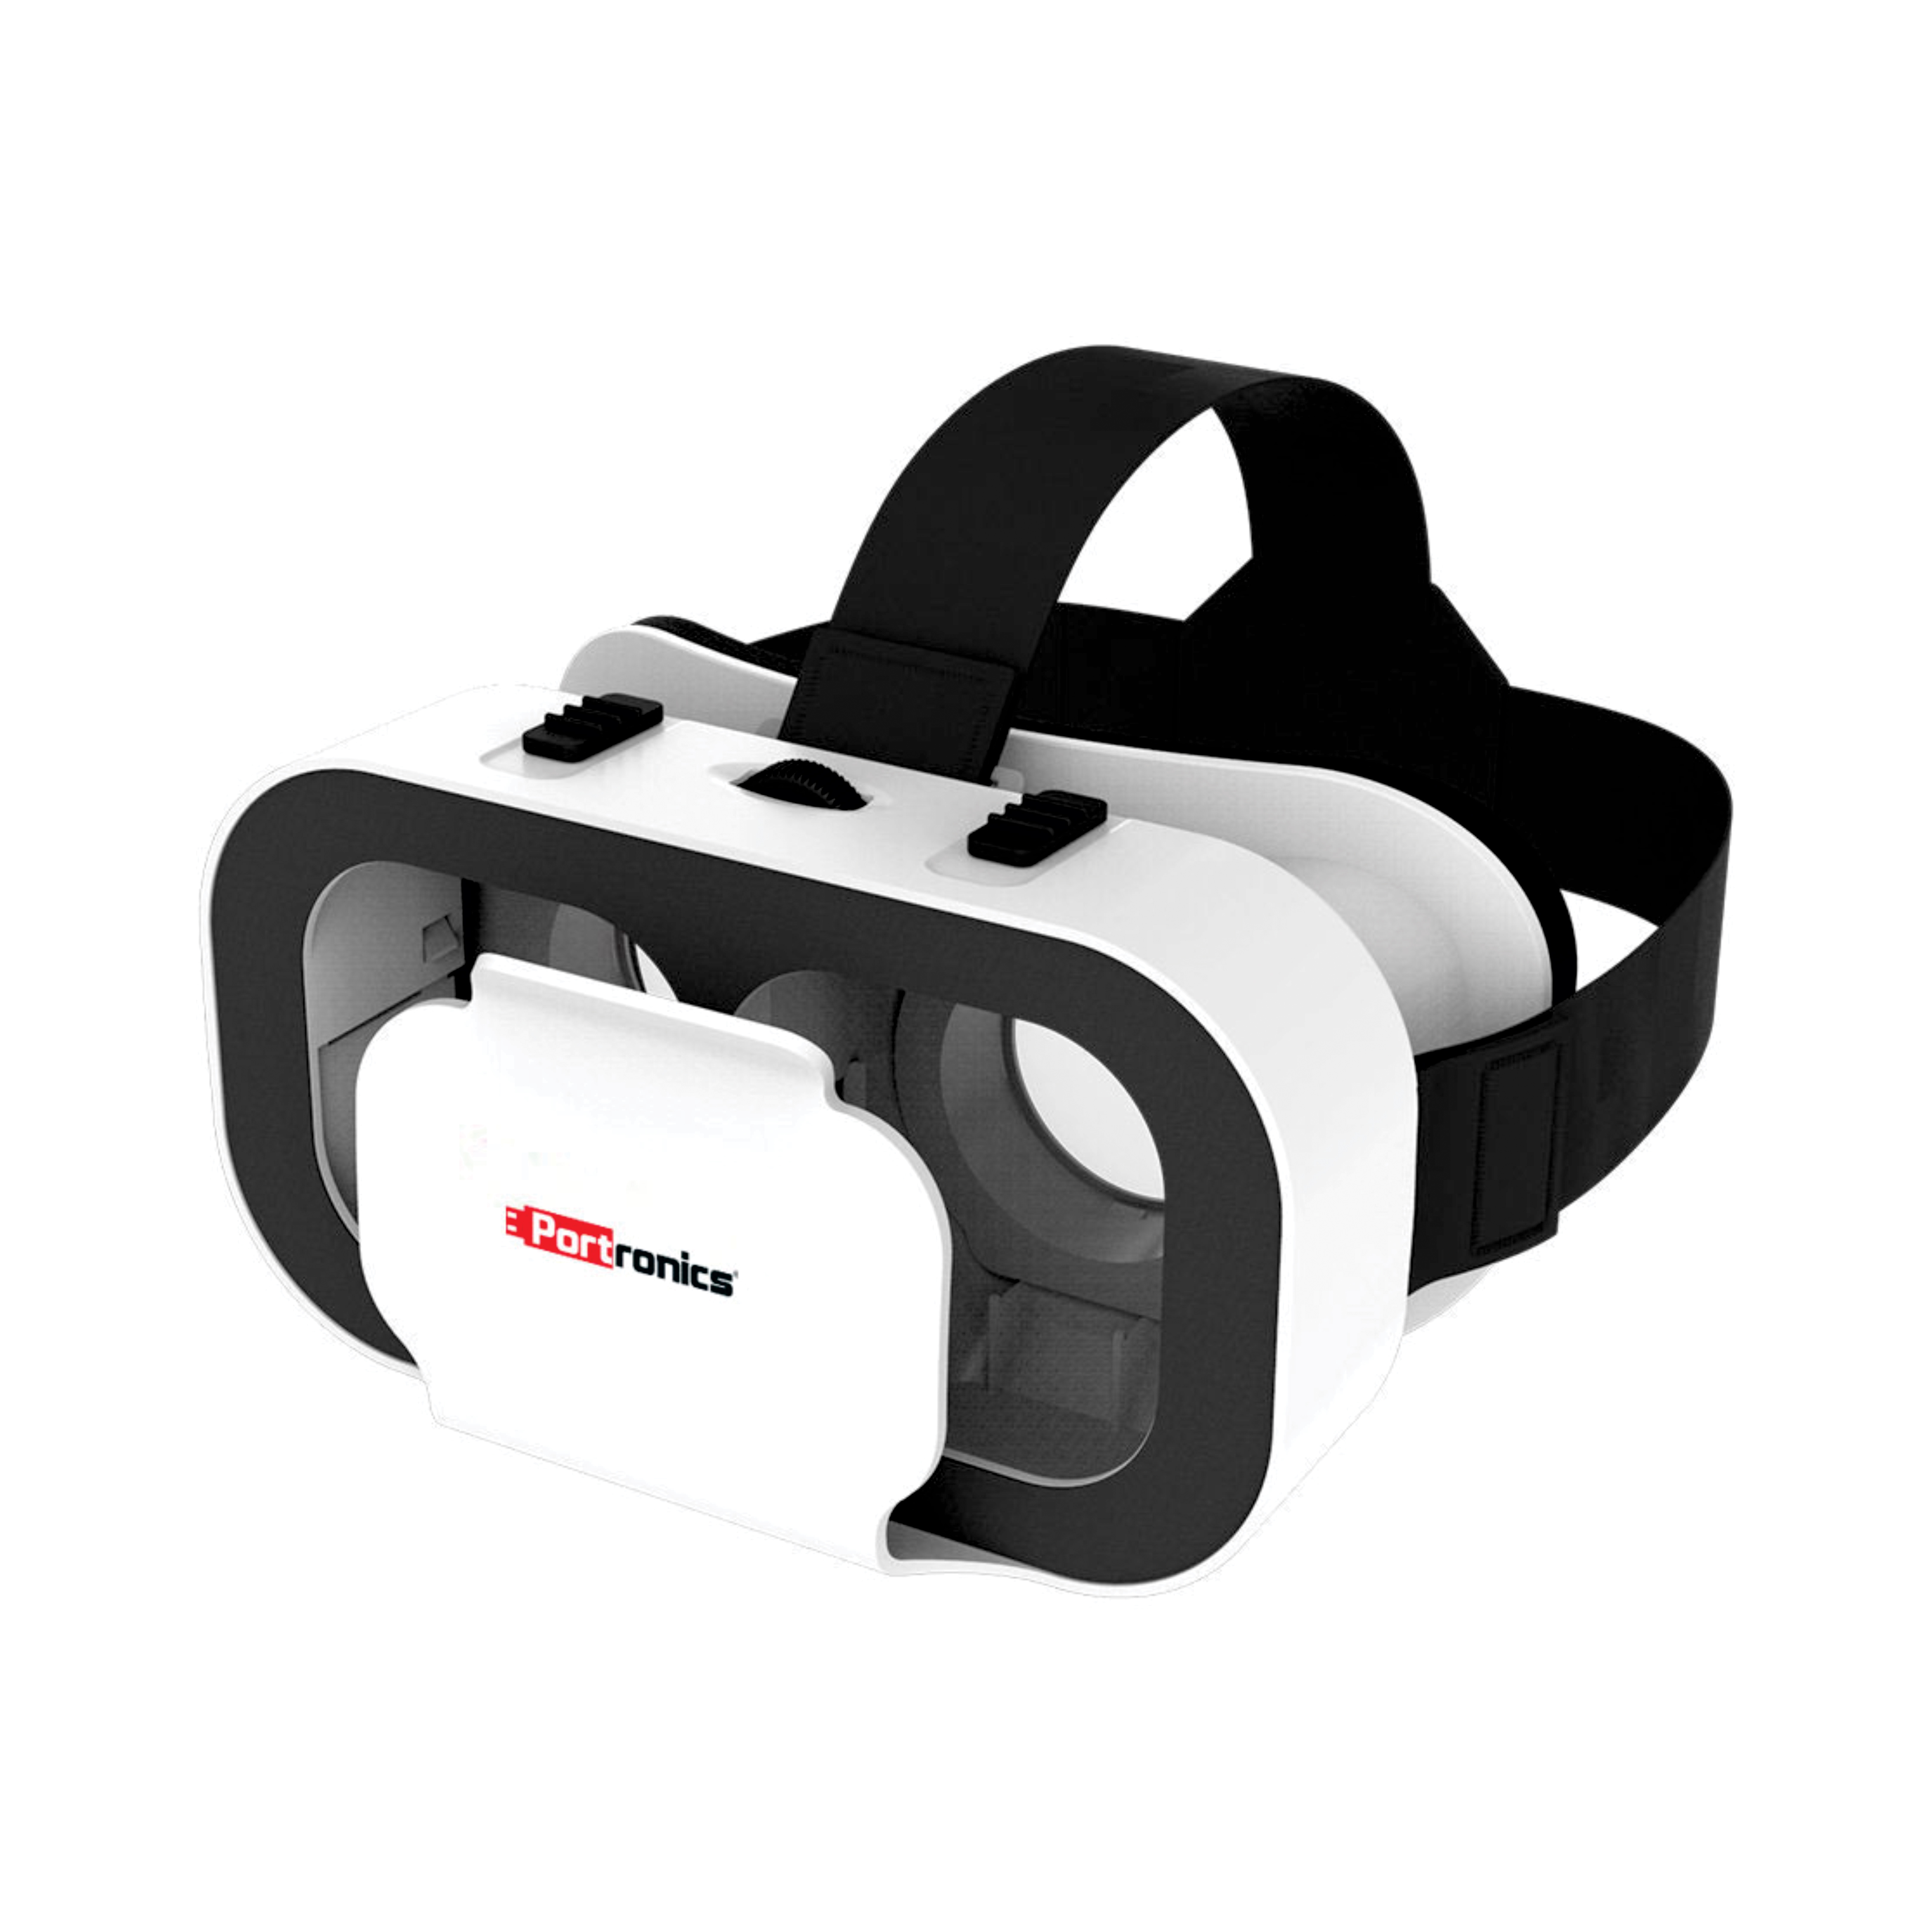 Read more about the article Portronics Launches the Virtual Reality Headset series, SAGA and SAGA Mini